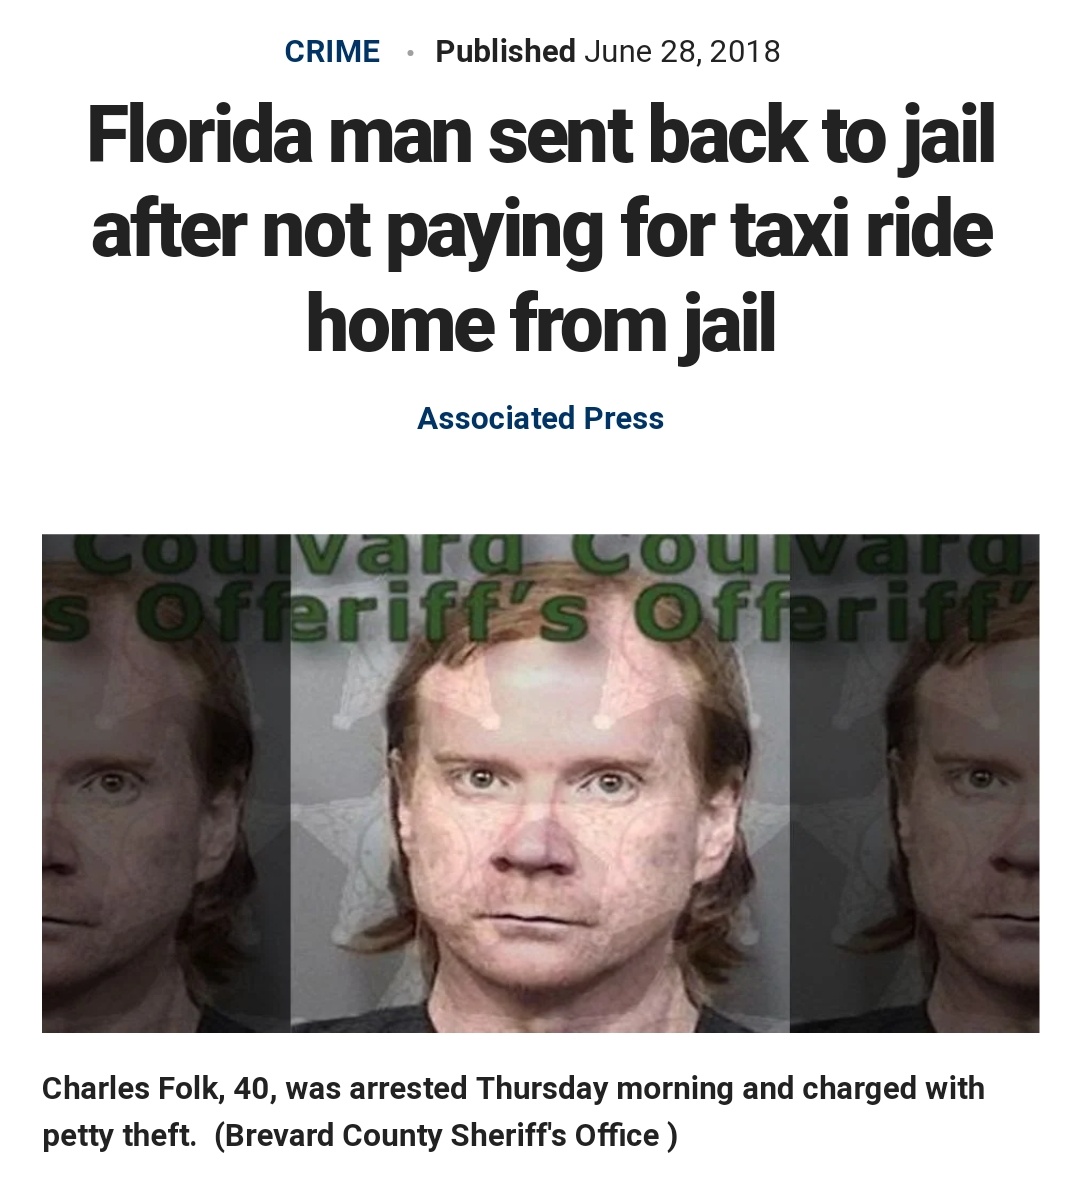 Florida man sent back to jail after not paying for taxi ride headline